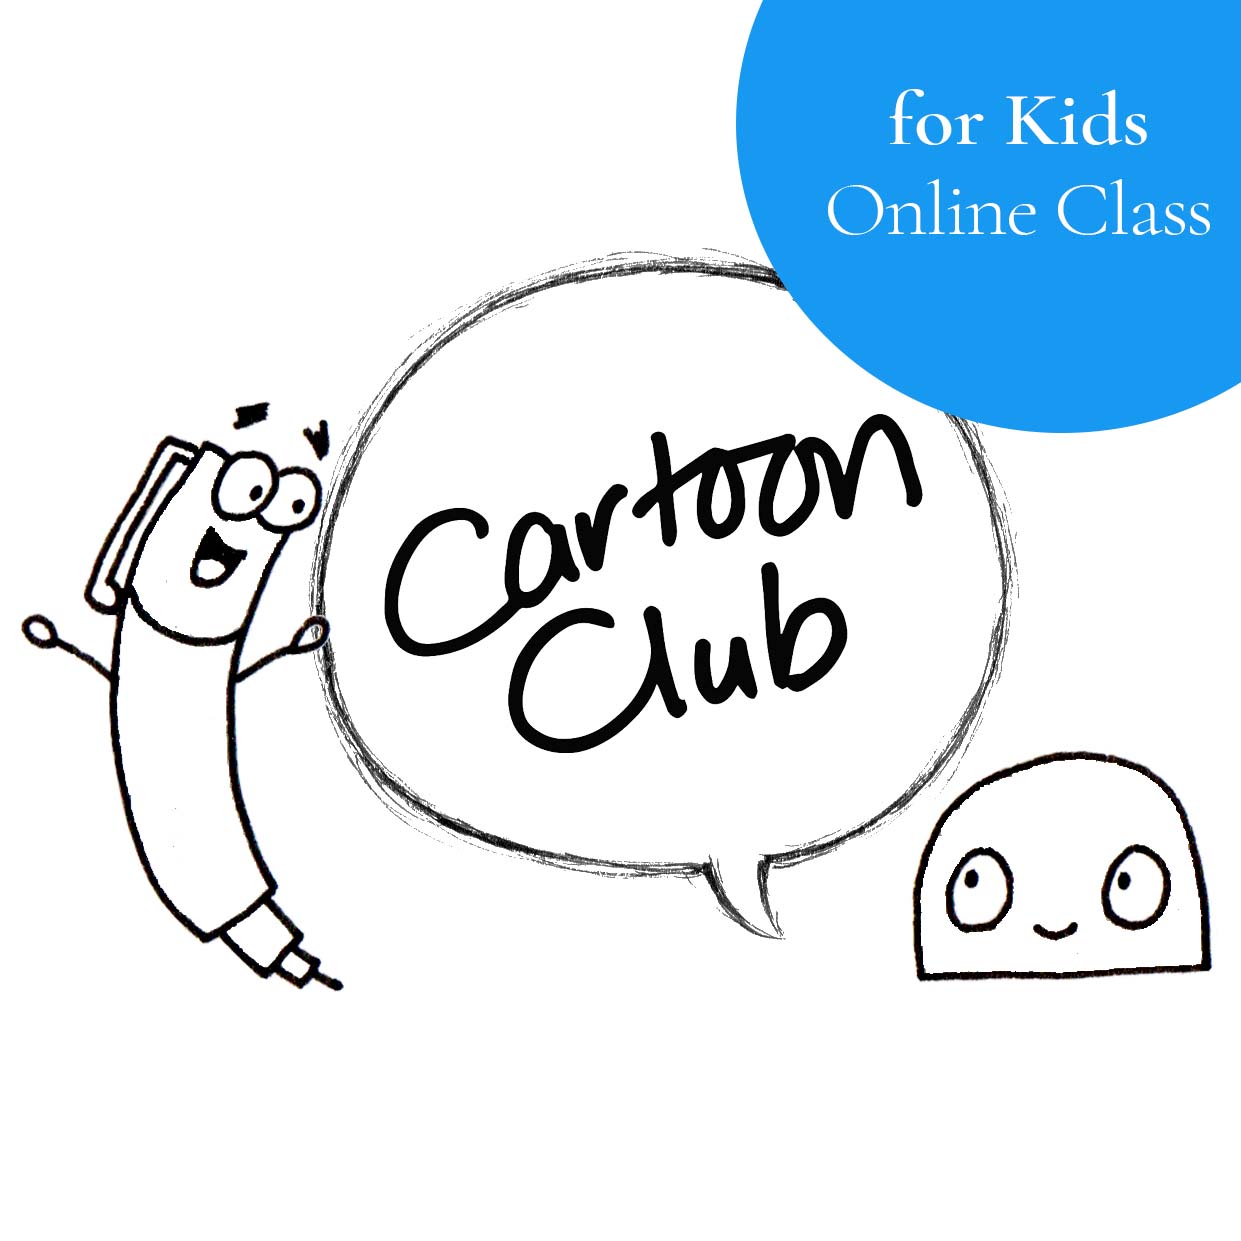 Cartoon Club for Kids Online art class for kids to learn to draw